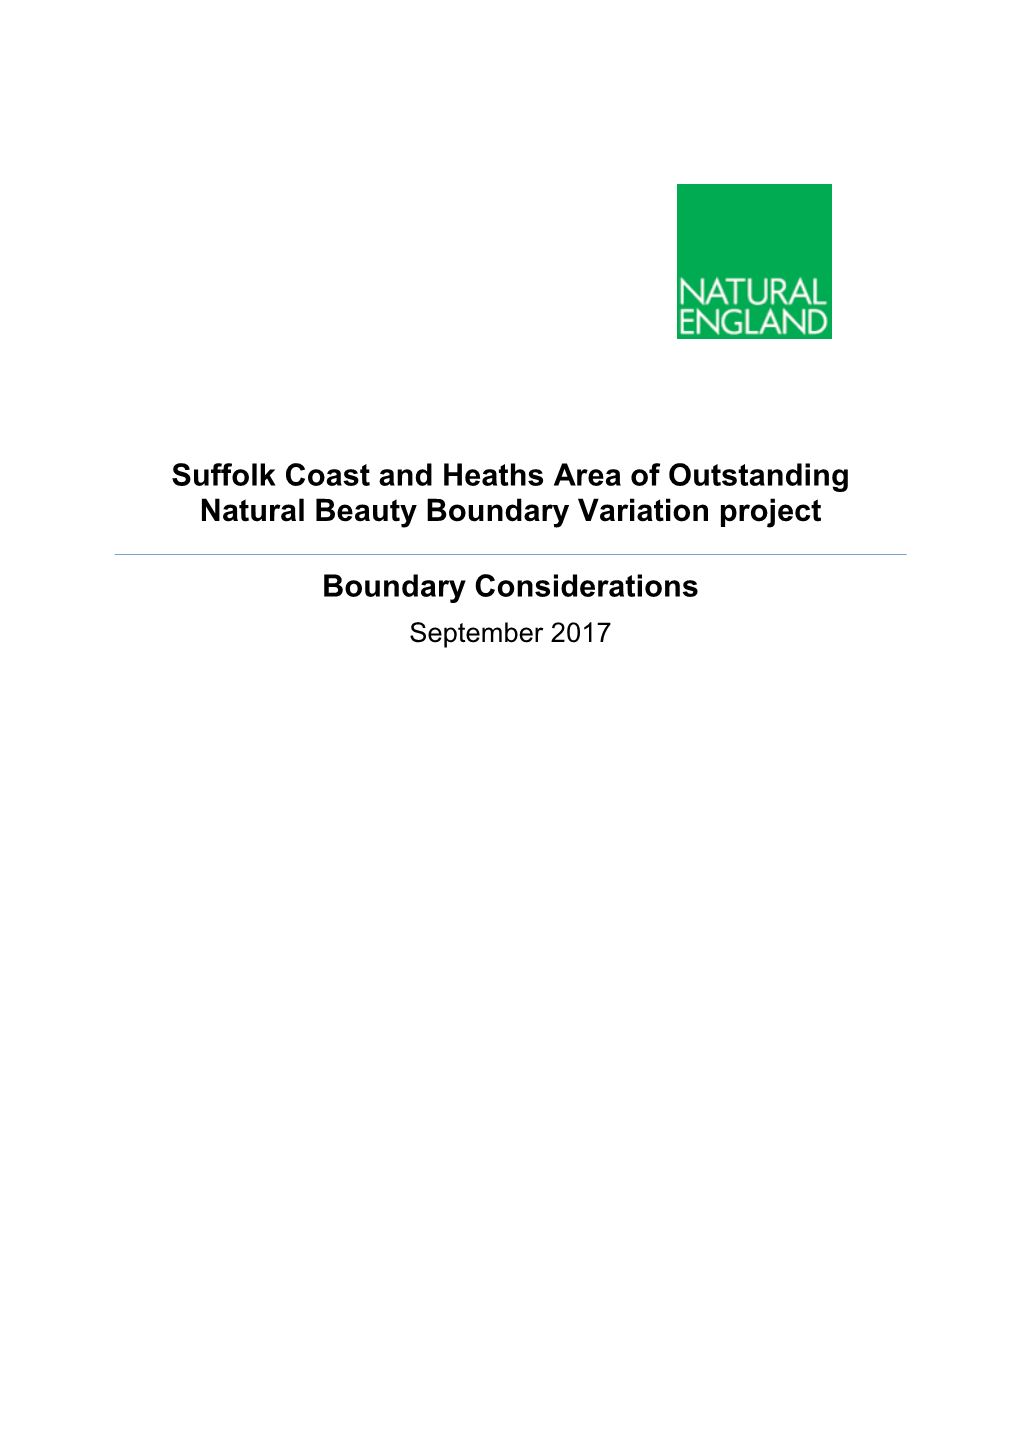 Suffolk Coast and Heaths Area of Outstanding Natural Beauty Boundary Variation Project